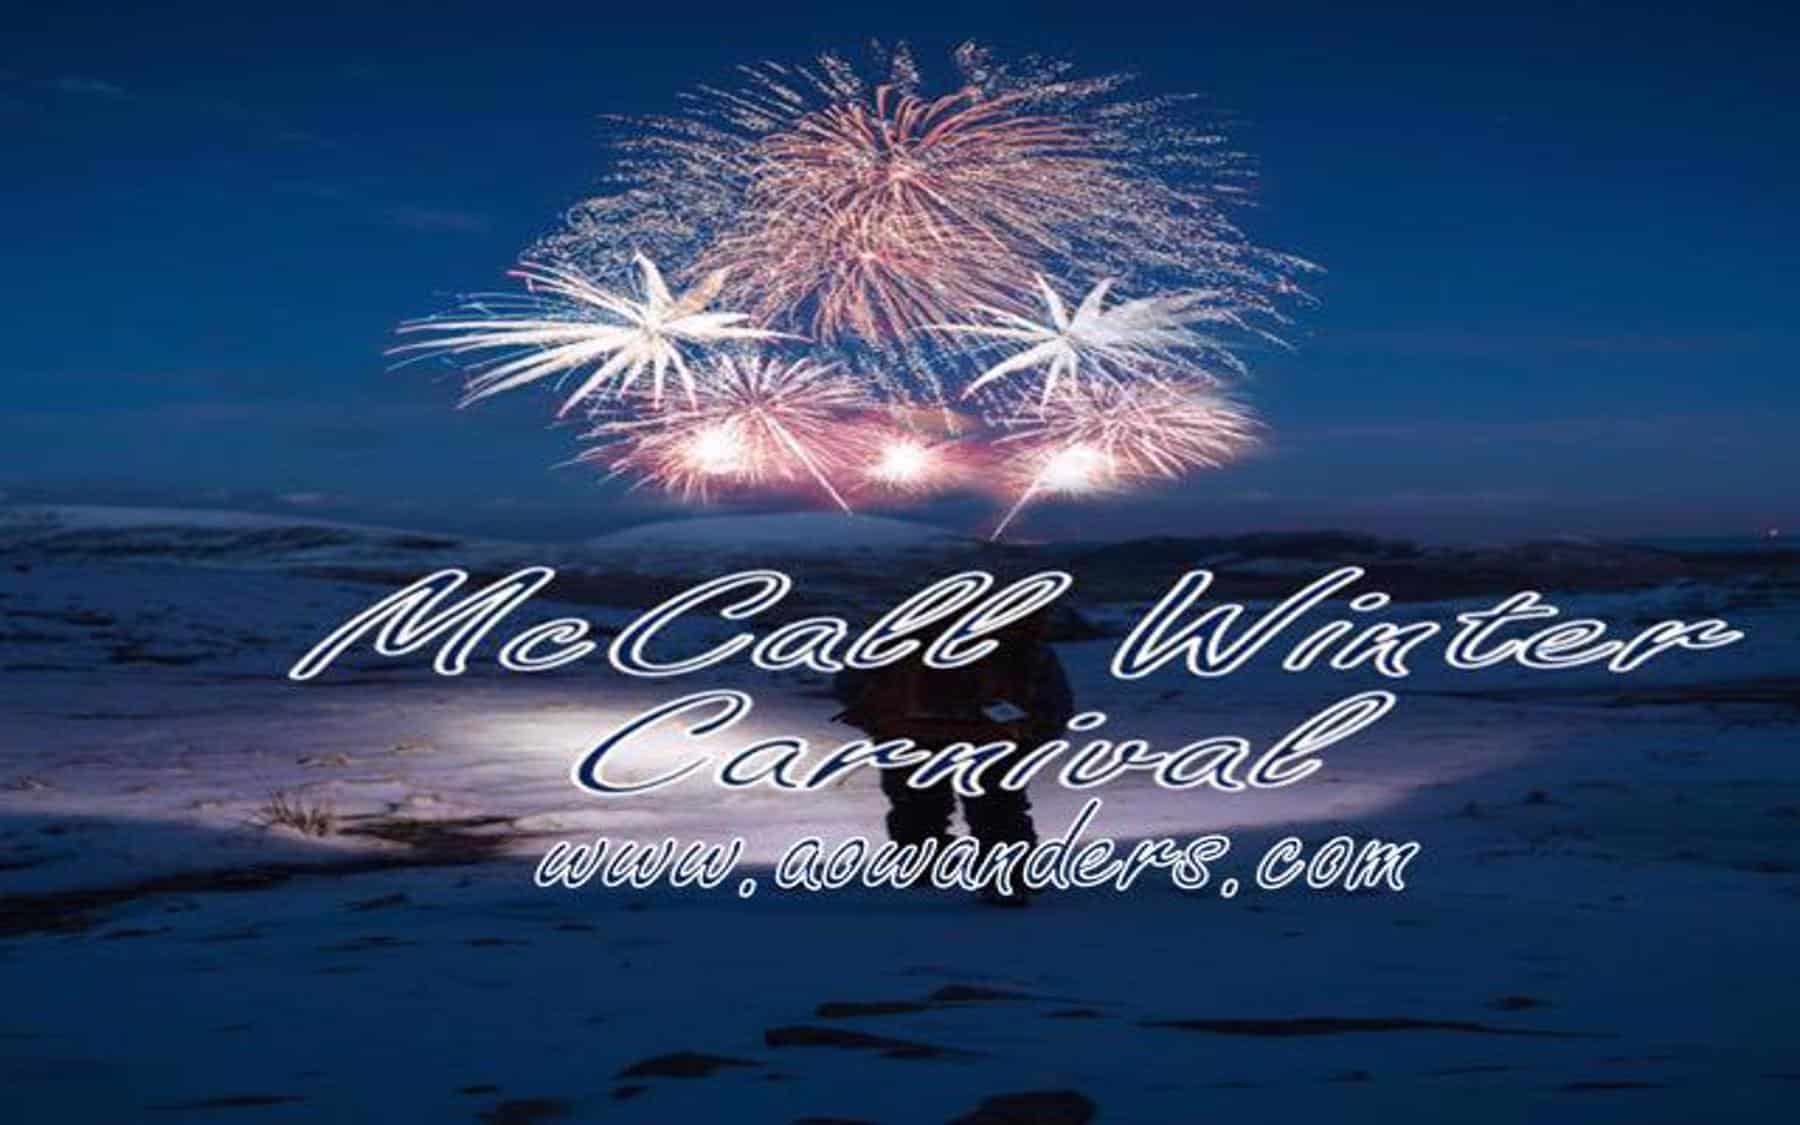 Official McCall Winter Carnival Guide AOWANDERS